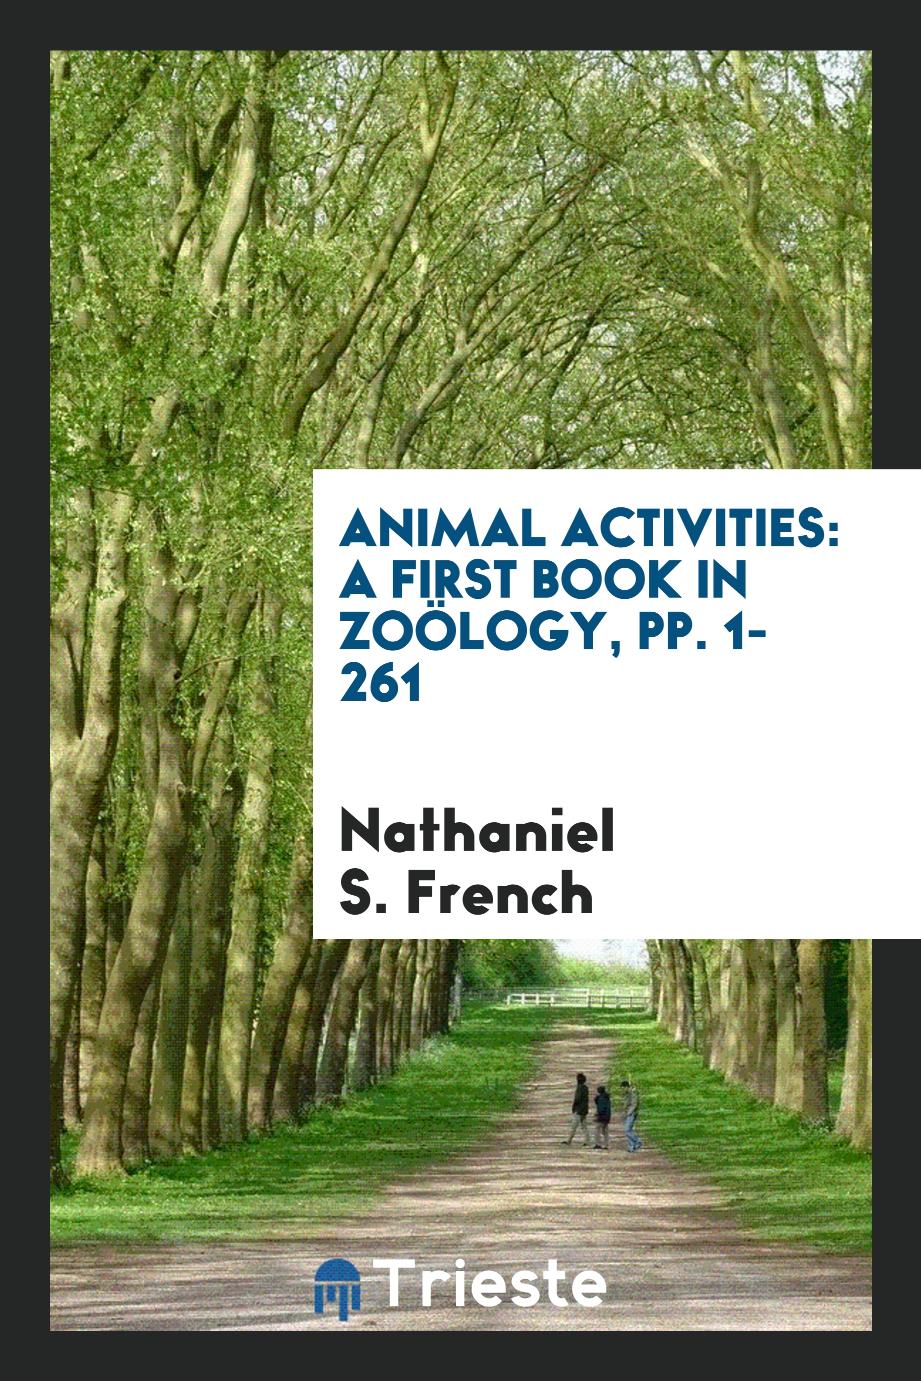 Animal Activities: A First Book in Zoölogy, pp. 1-261